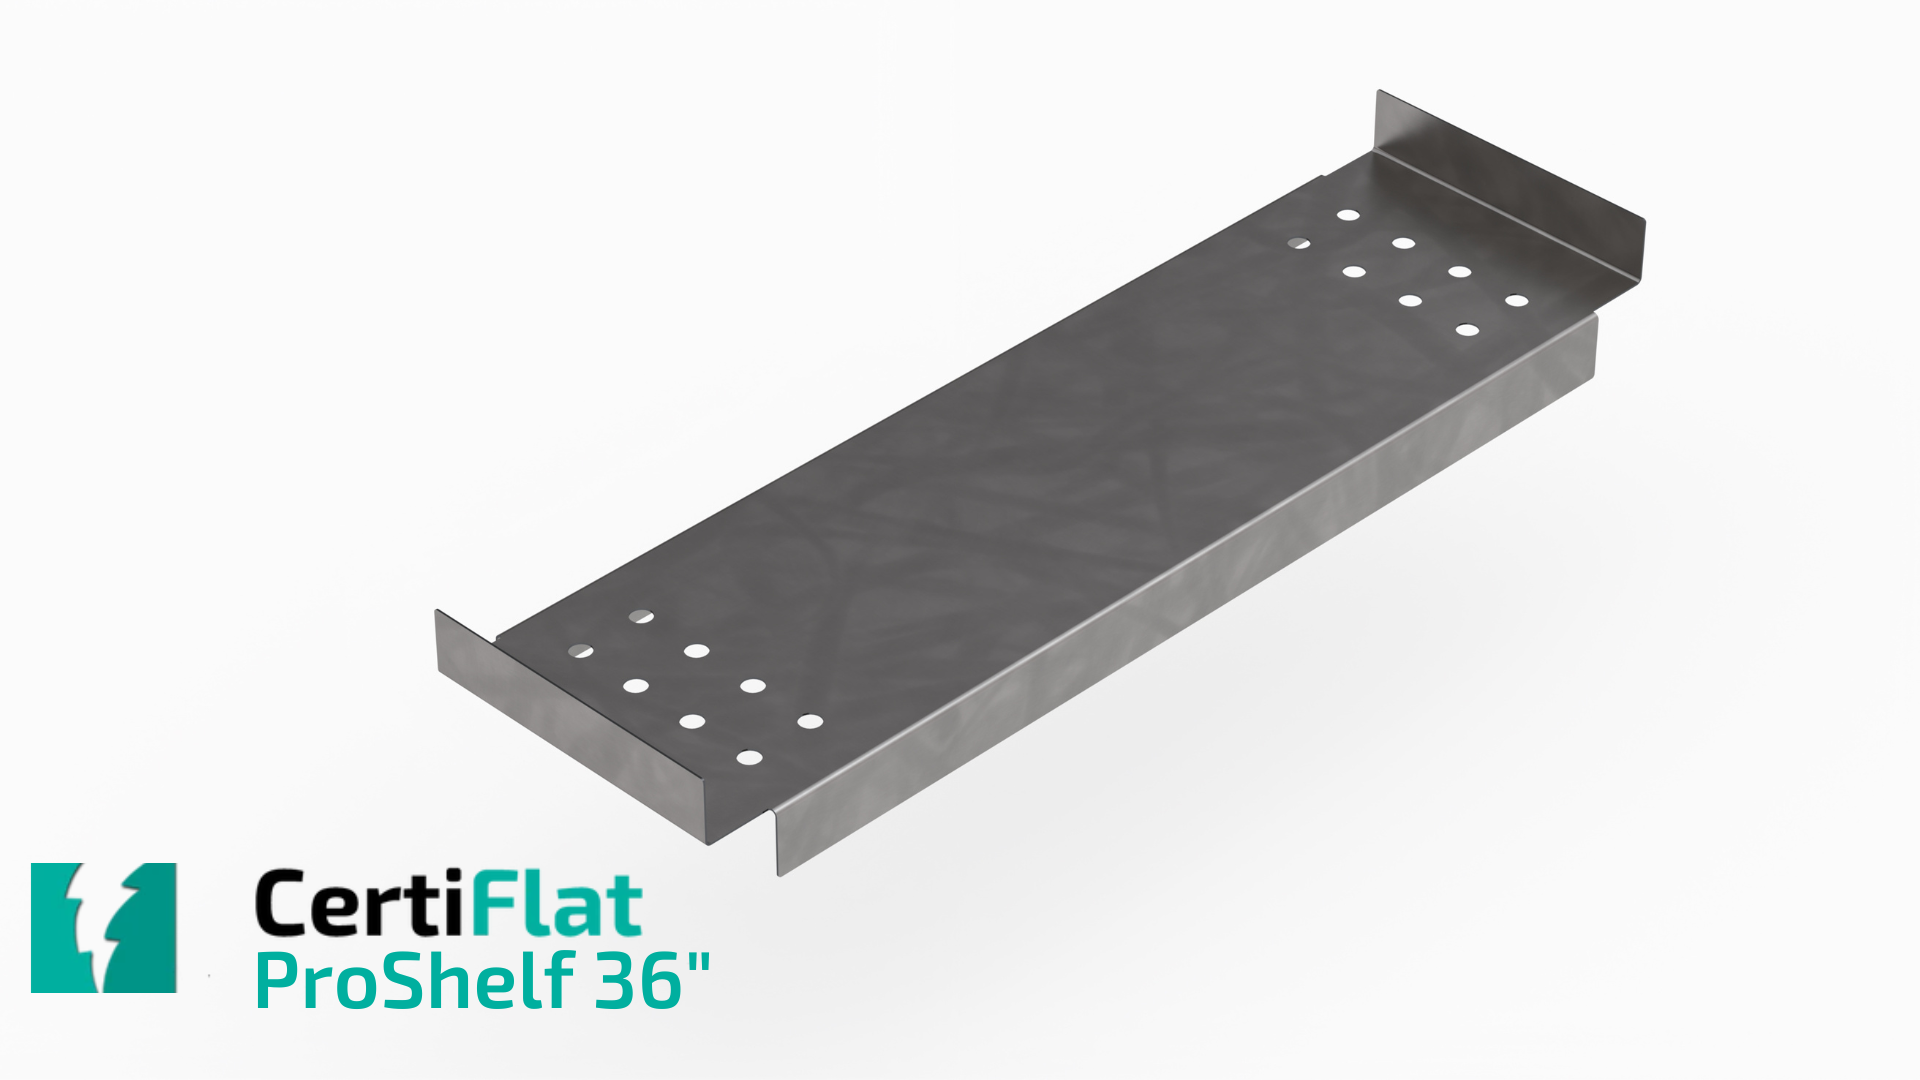 Sturdy and sleek CertiFlat ProShelf 36 made of 16-gauge A36 HRPO steel, showcasing its versatile dual-use design with edges for tool security and a flat surface for storage.